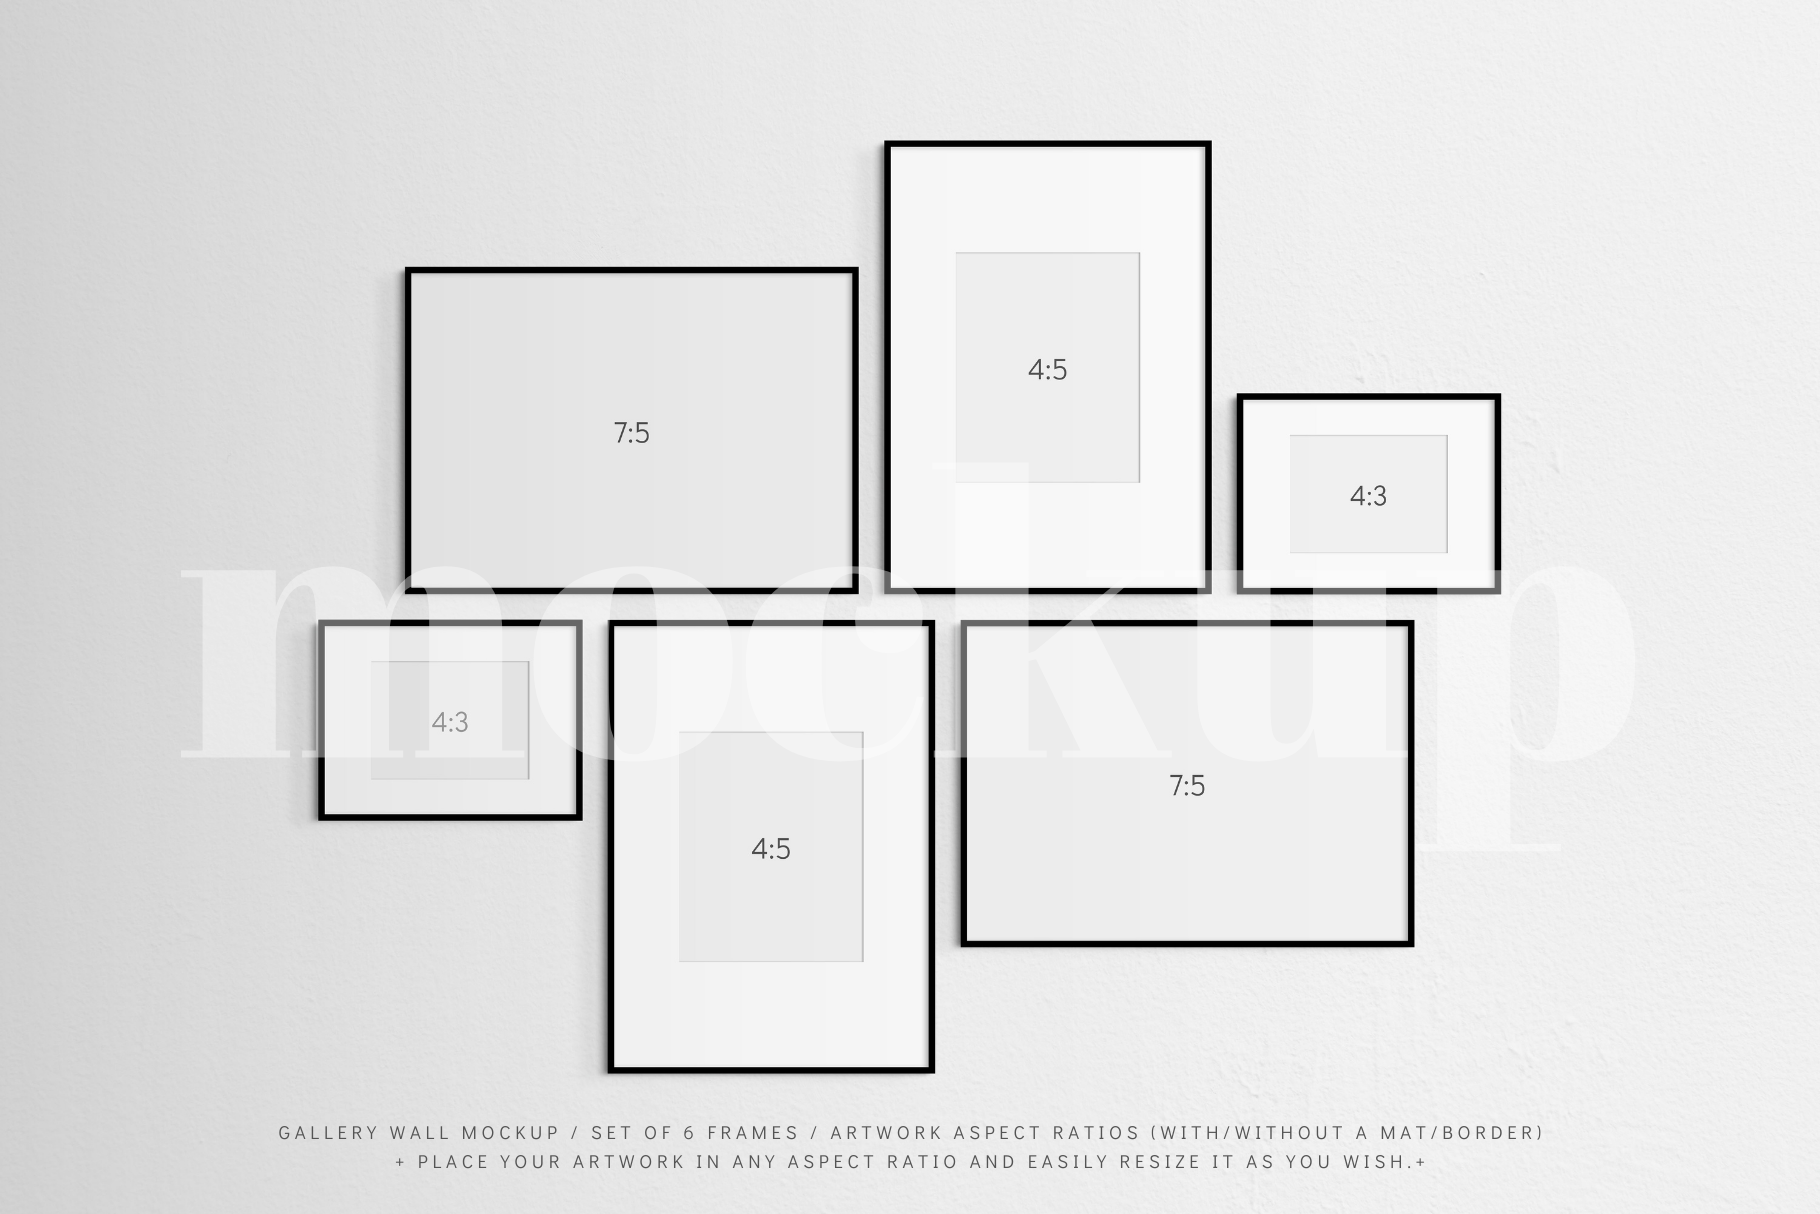 A gallery wall frame mockup that features a set of 6 thin black frames with or without a white mat (passe-partout) border.